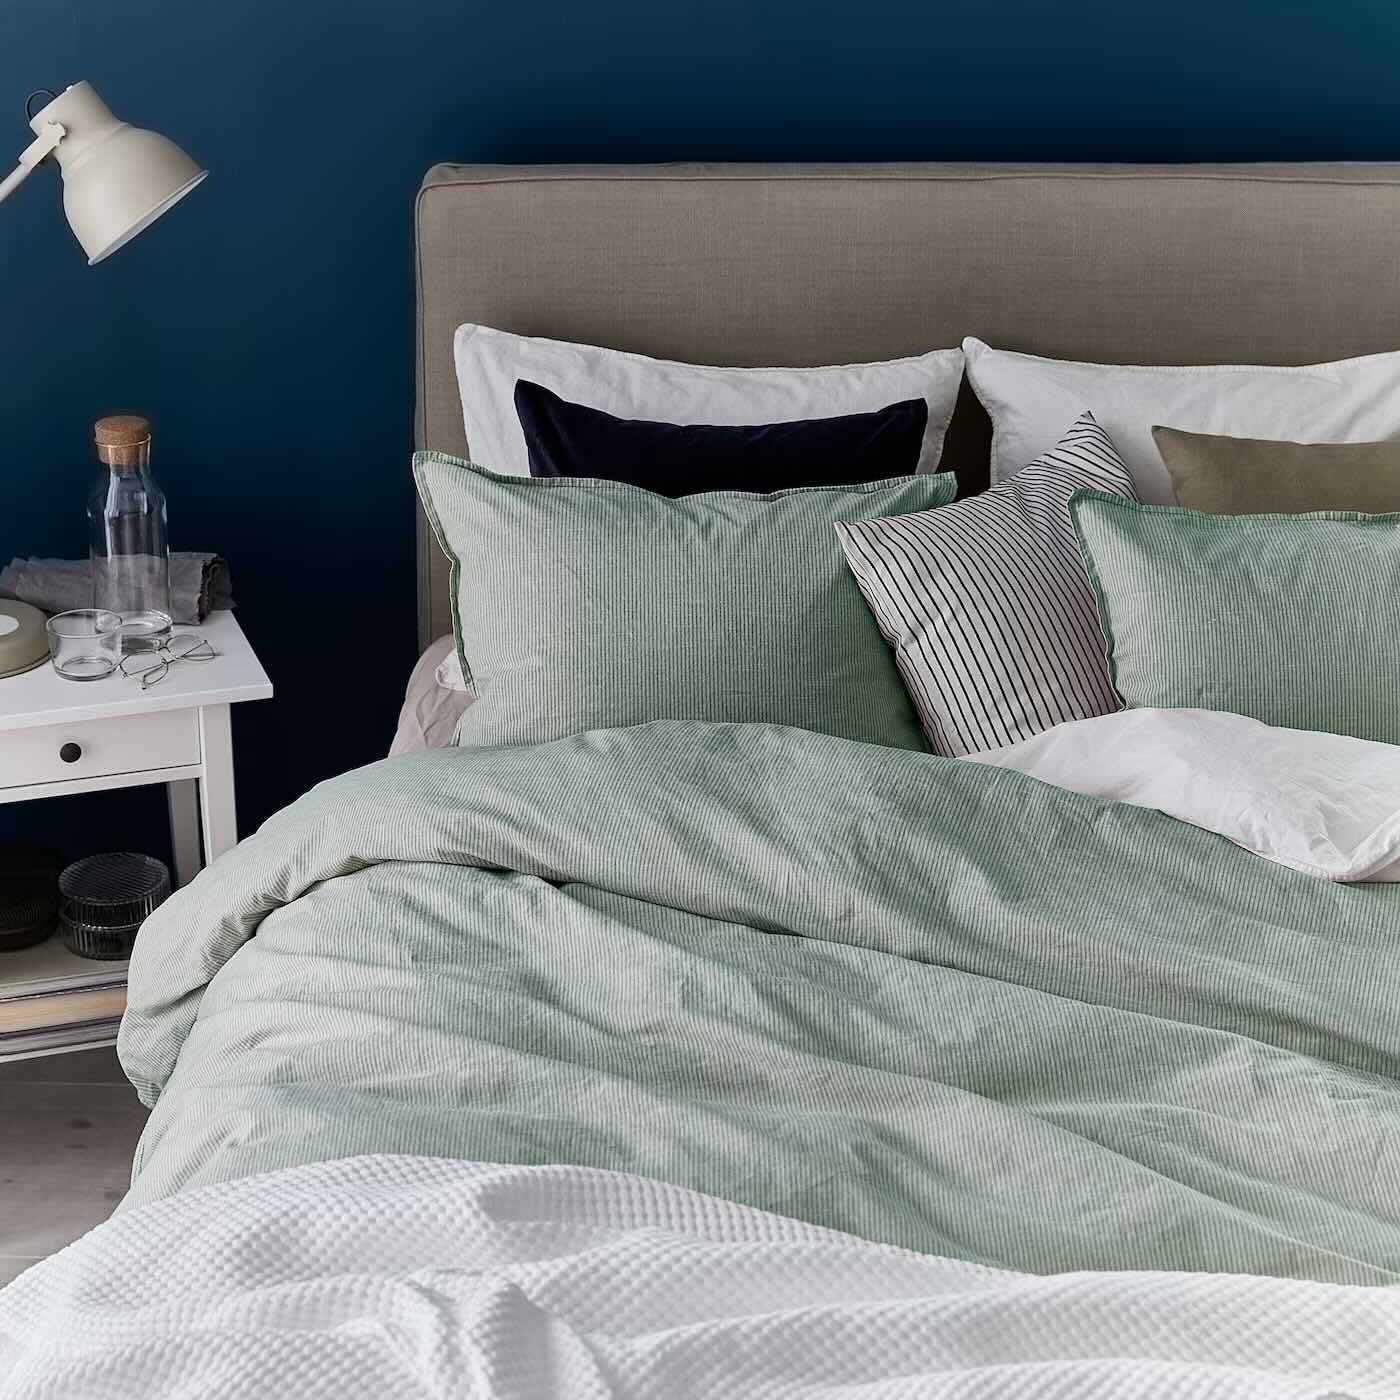 How To Put On An IKEA Duvet Cover